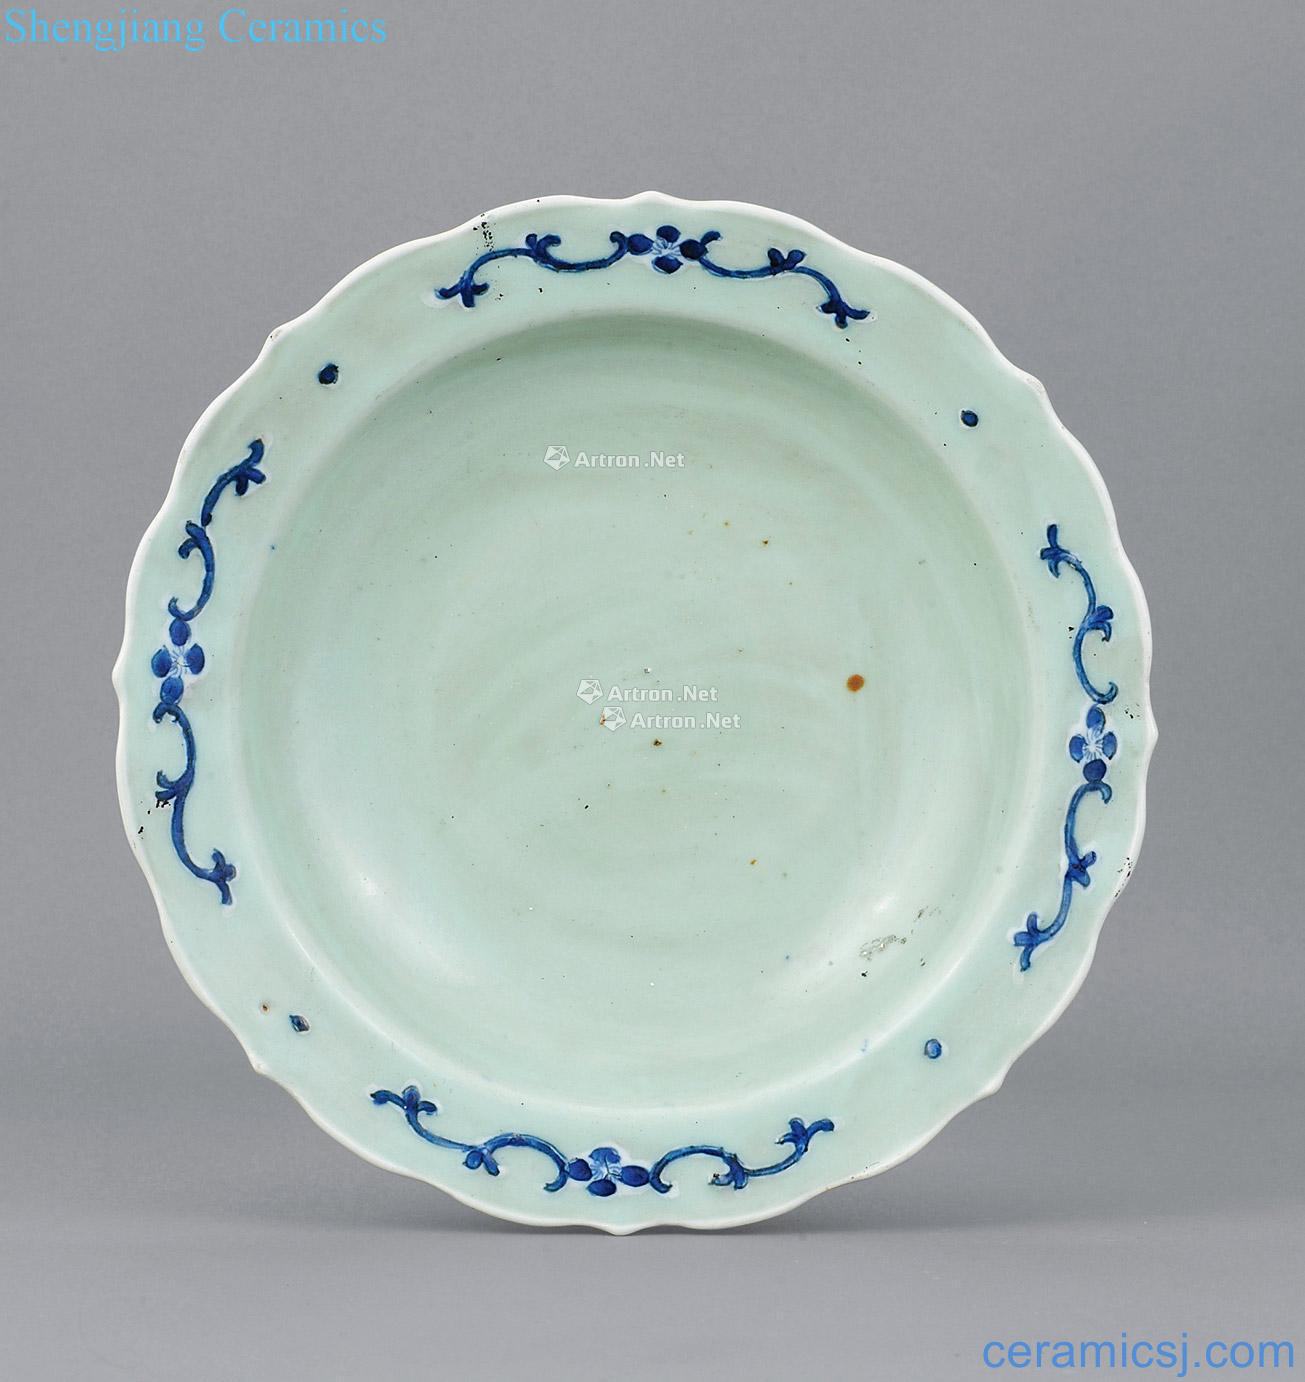 Pea green to blue and white kwai mouth tray